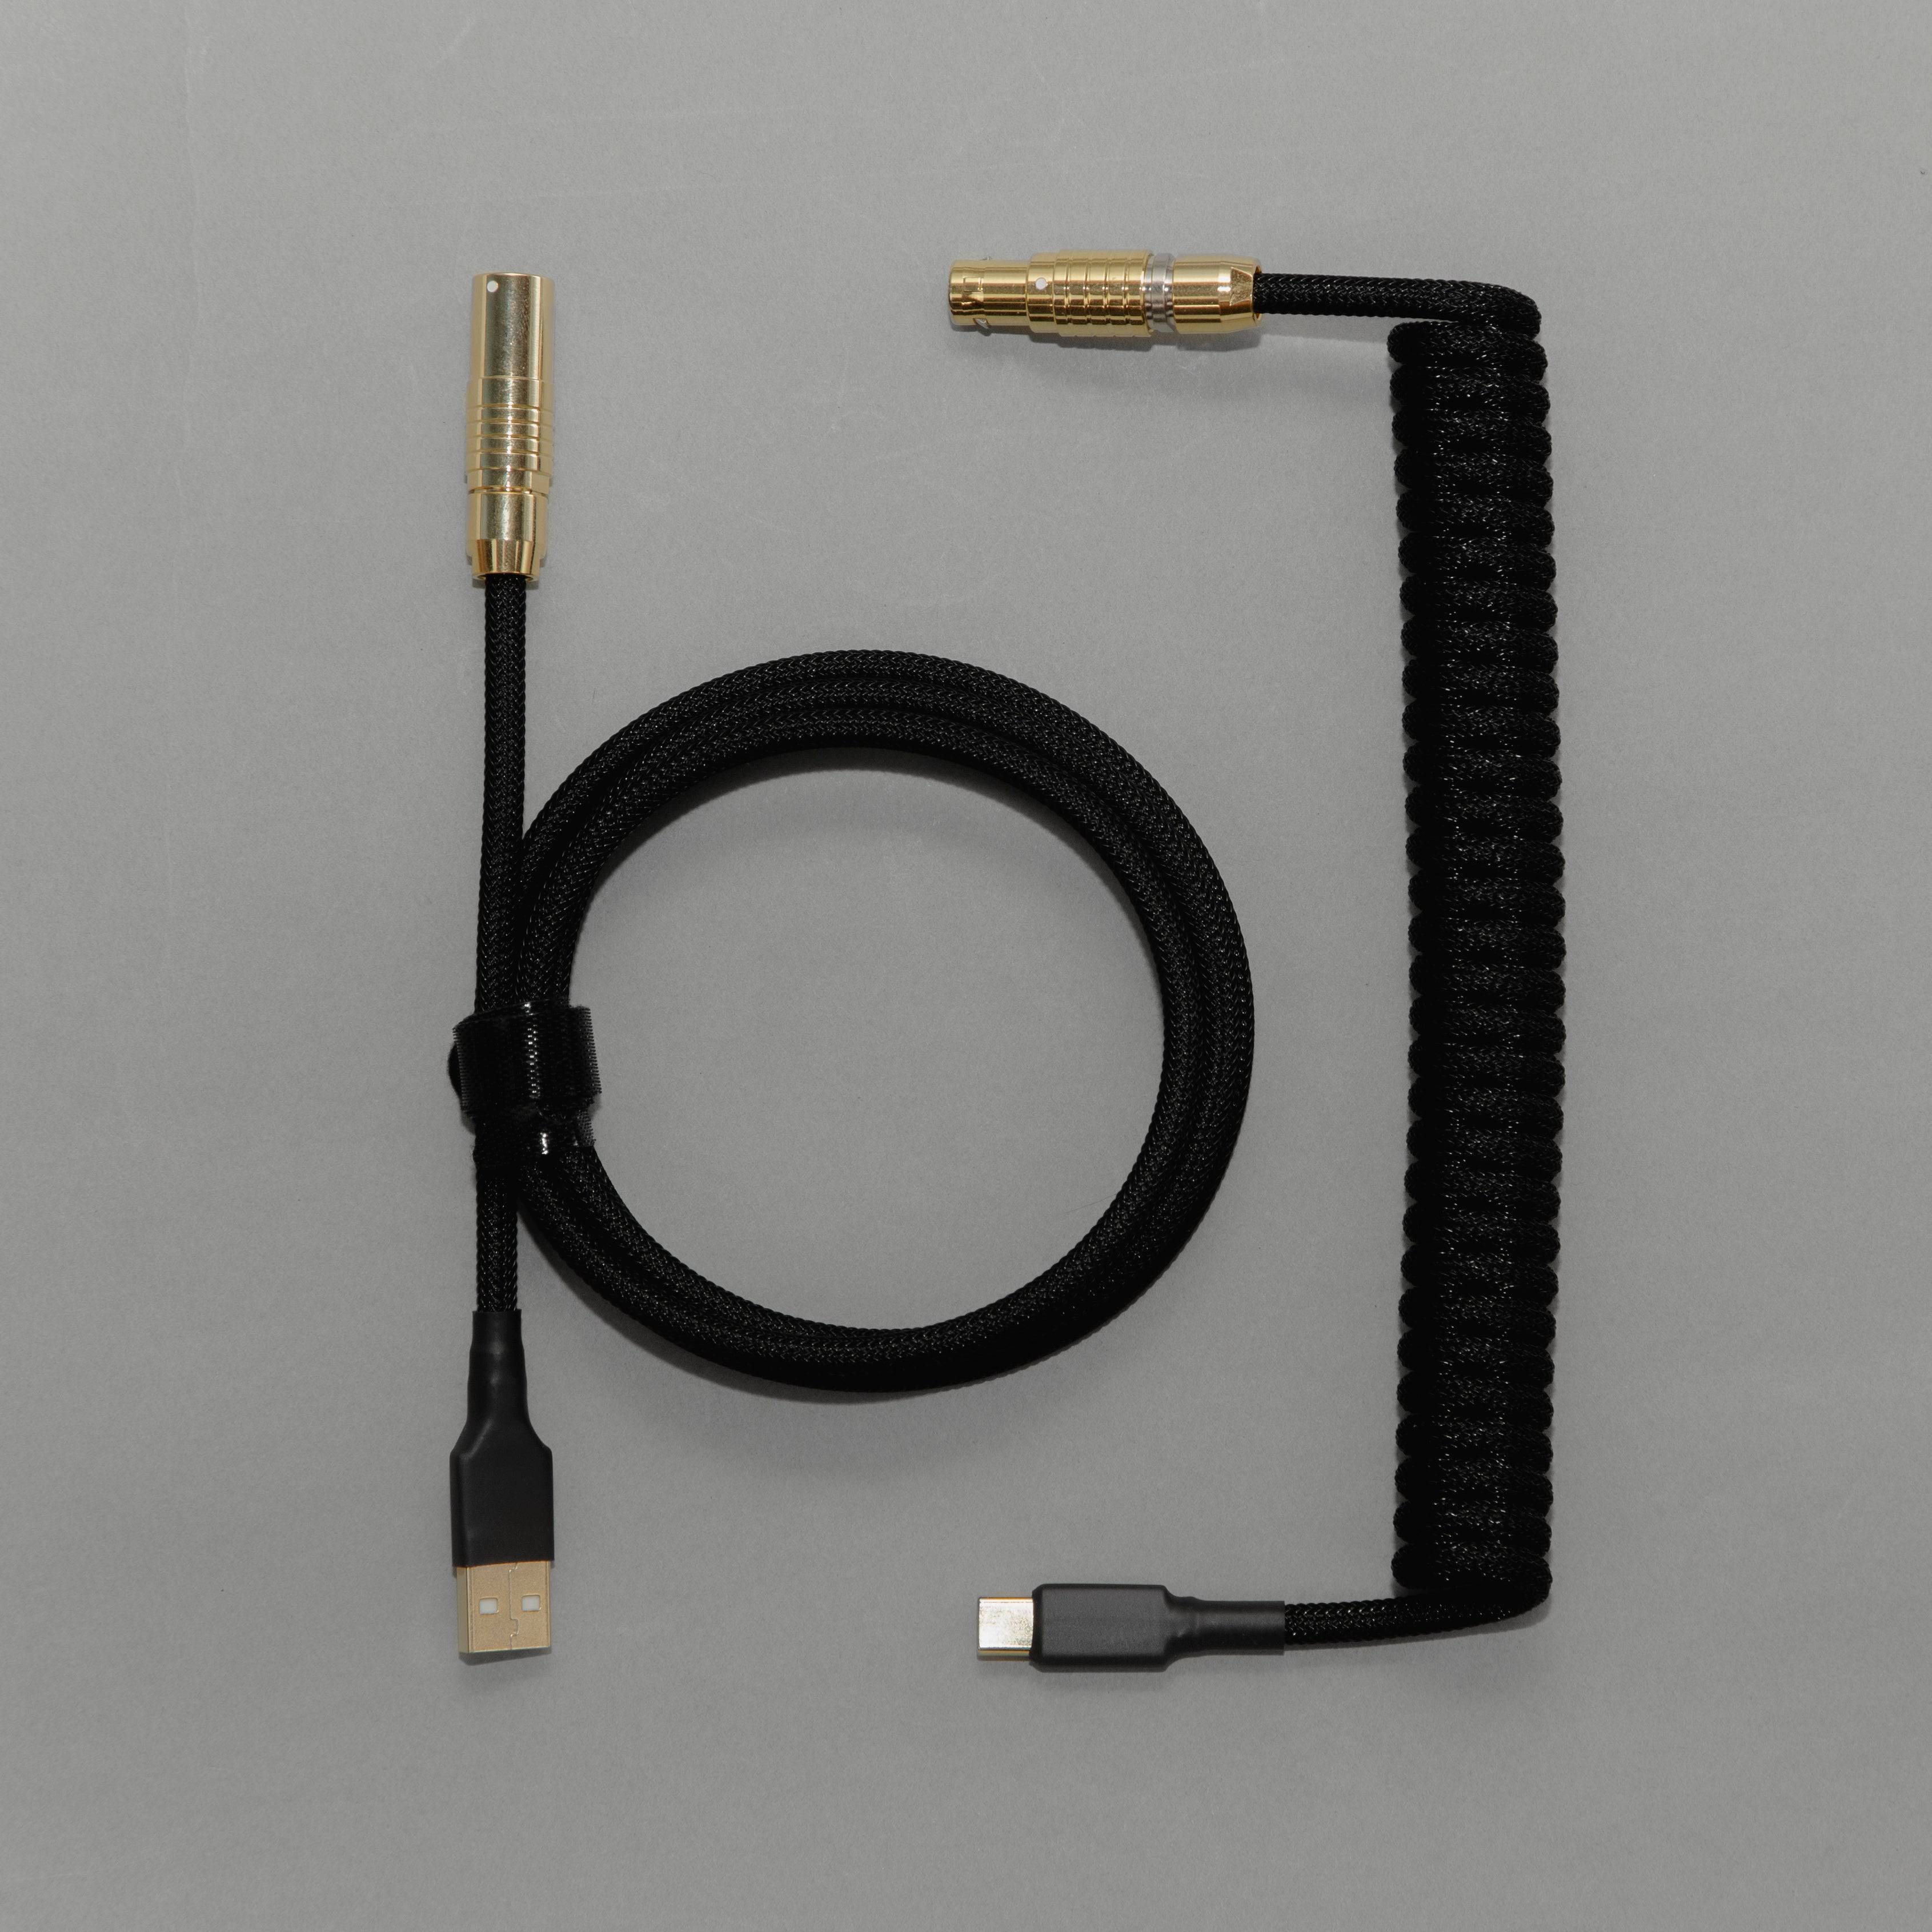 Viendi 8L Black & Gold Luxury Cable proxied by KeebsForAll